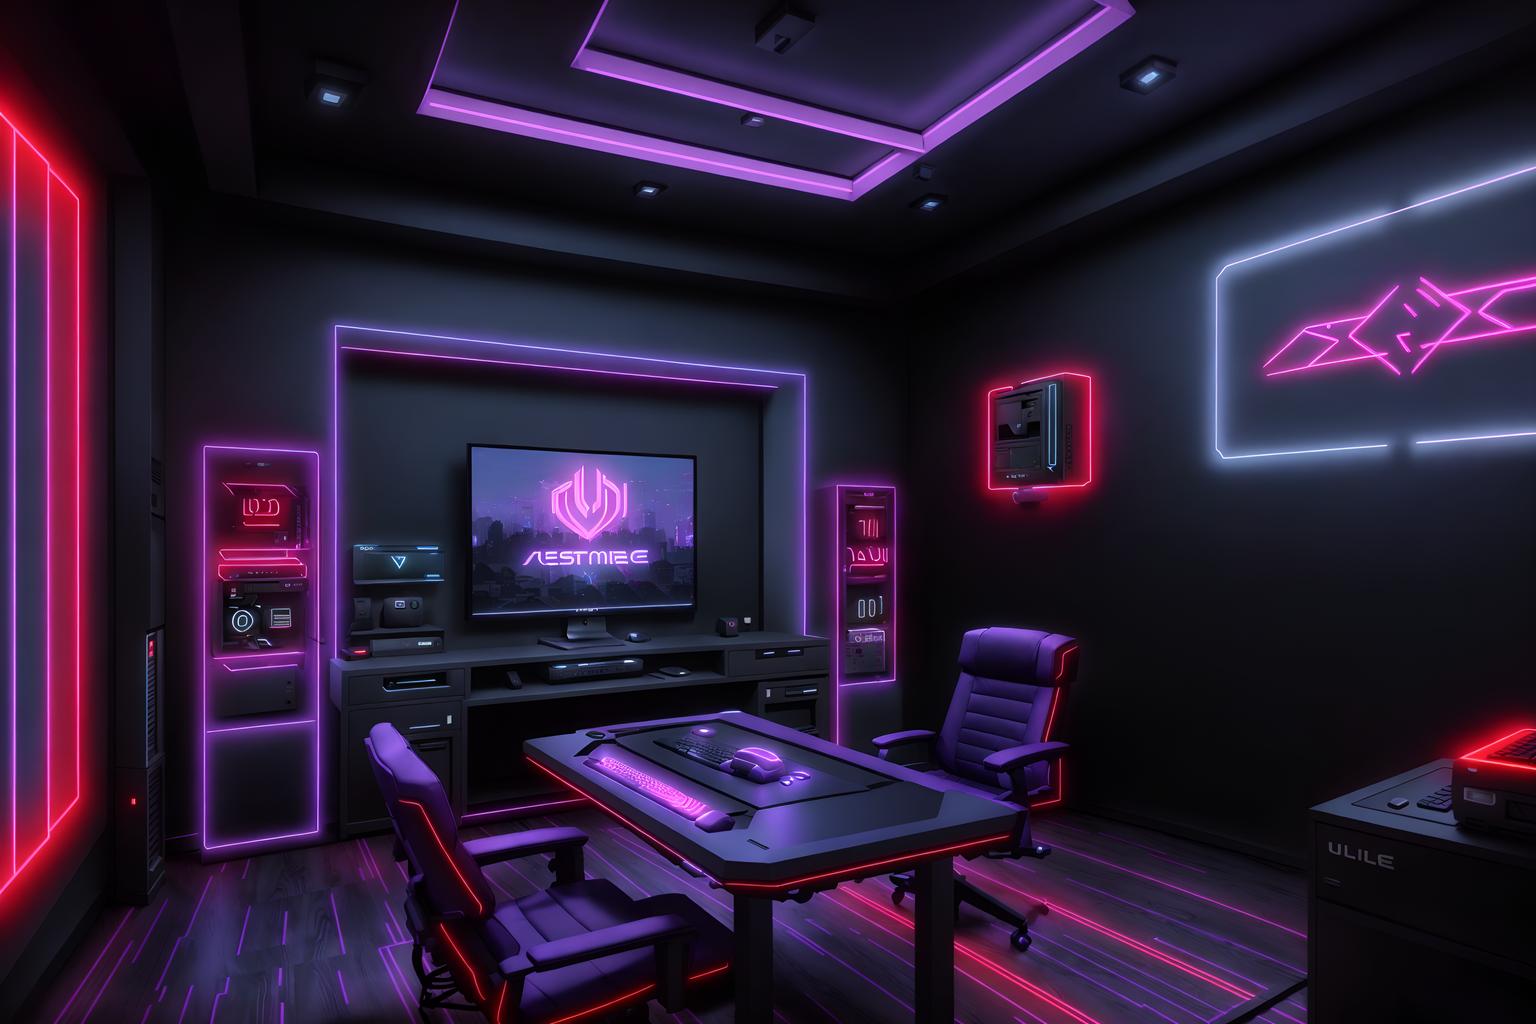 gaming room-style exterior designed (house exterior exterior) . with purple, red and blue fade light and neon lights and at night and computer desk with computer displays and keyboard and neon letters on wall and dark walls and multiple displays and purple and red lights. . cinematic photo, highly detailed, cinematic lighting, ultra-detailed, ultrarealistic, photorealism, 8k. gaming room exterior design style. masterpiece, cinematic light, ultrarealistic+, photorealistic+, 8k, raw photo, realistic, sharp focus on eyes, (symmetrical eyes), (intact eyes), hyperrealistic, highest quality, best quality, , highly detailed, masterpiece, best quality, extremely detailed 8k wallpaper, masterpiece, best quality, ultra-detailed, best shadow, detailed background, detailed face, detailed eyes, high contrast, best illumination, detailed face, dulux, caustic, dynamic angle, detailed glow. dramatic lighting. highly detailed, insanely detailed hair, symmetrical, intricate details, professionally retouched, 8k high definition. strong bokeh. award winning photo.